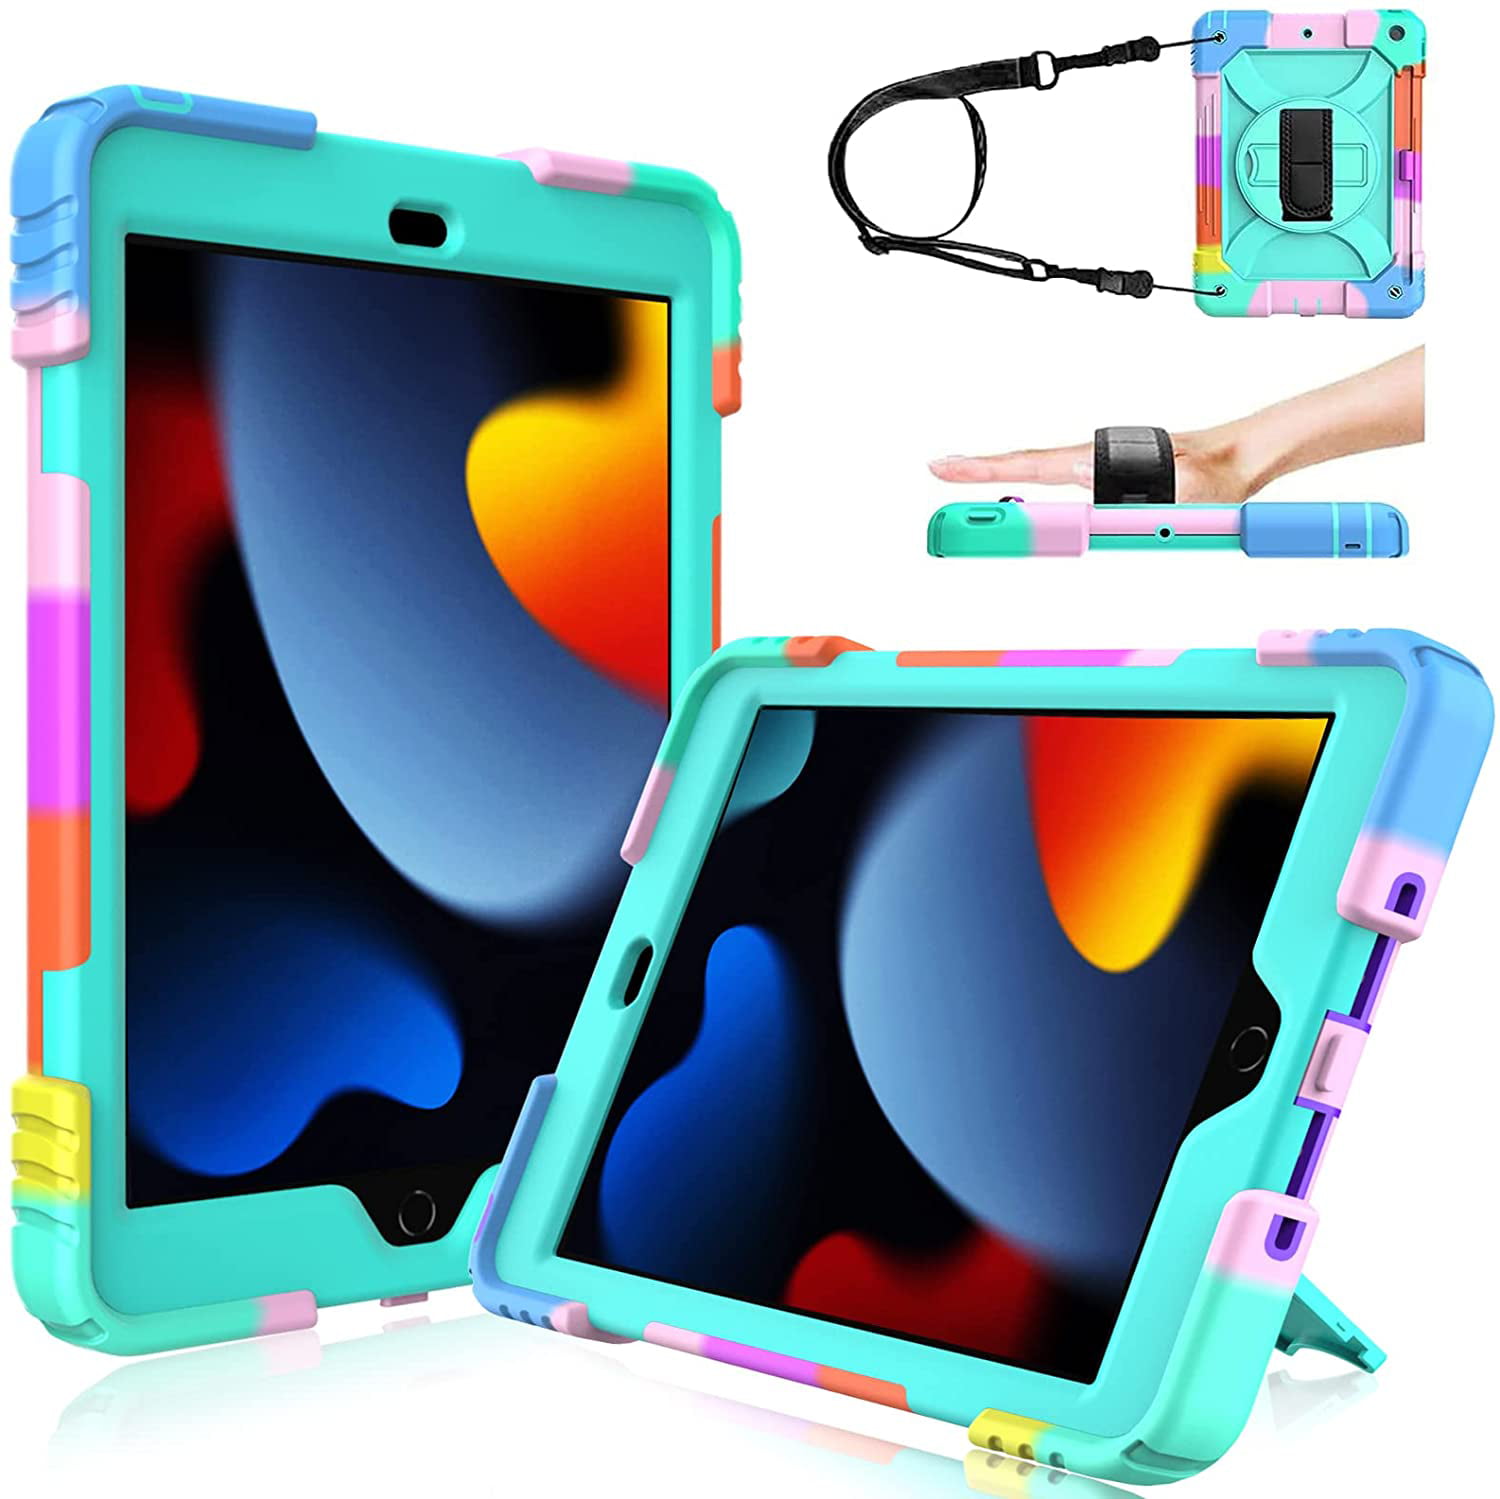 9.7Inch Case Colorful Design Leather Stand Case for Apple iPad Air Bear Village iPad Air Black 1 Anti Scratch Shell with Adjust Stand 9.7Inch